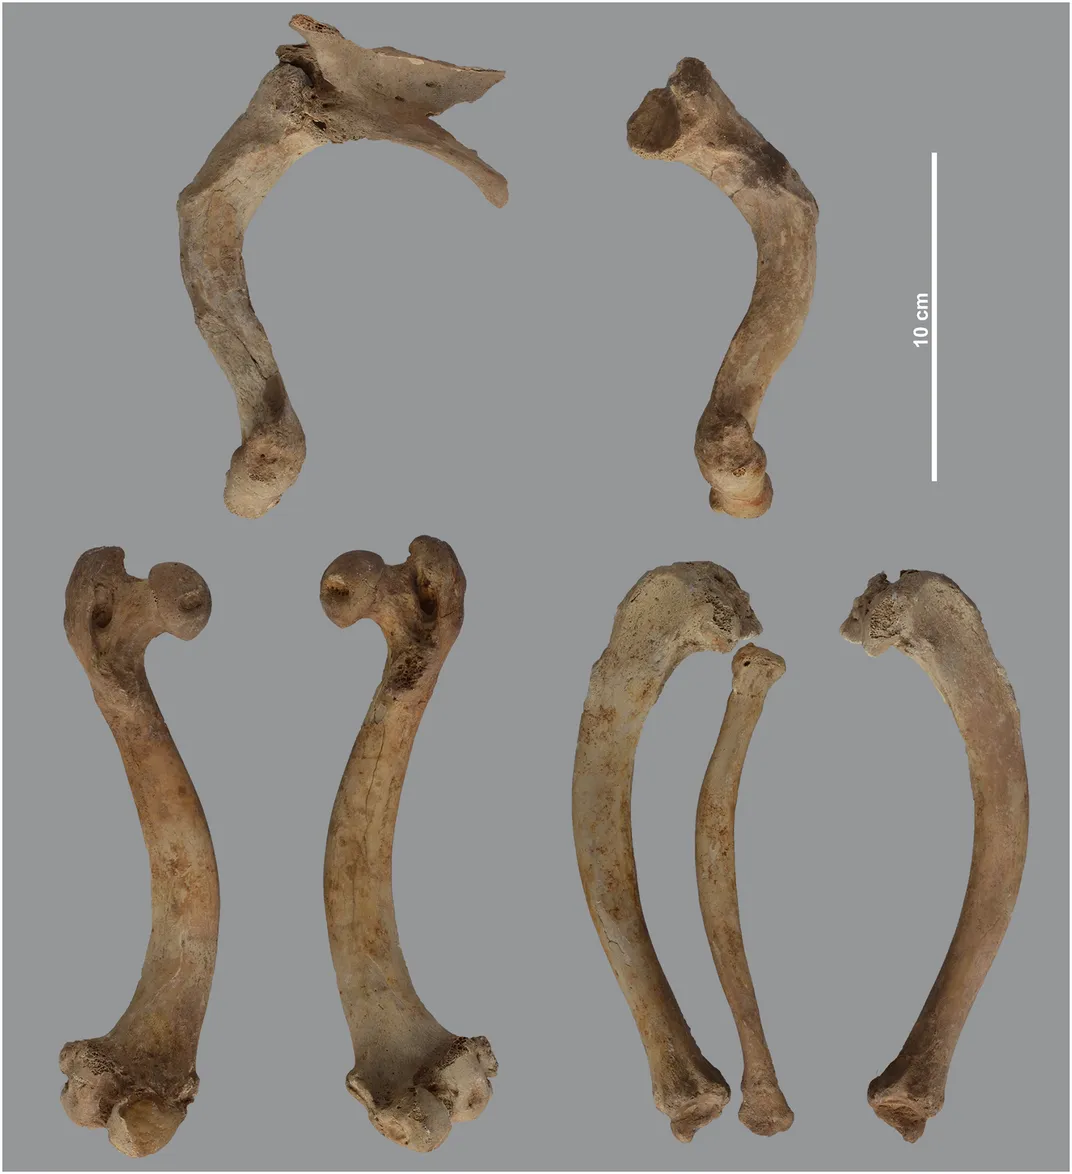 Overview of the long bones